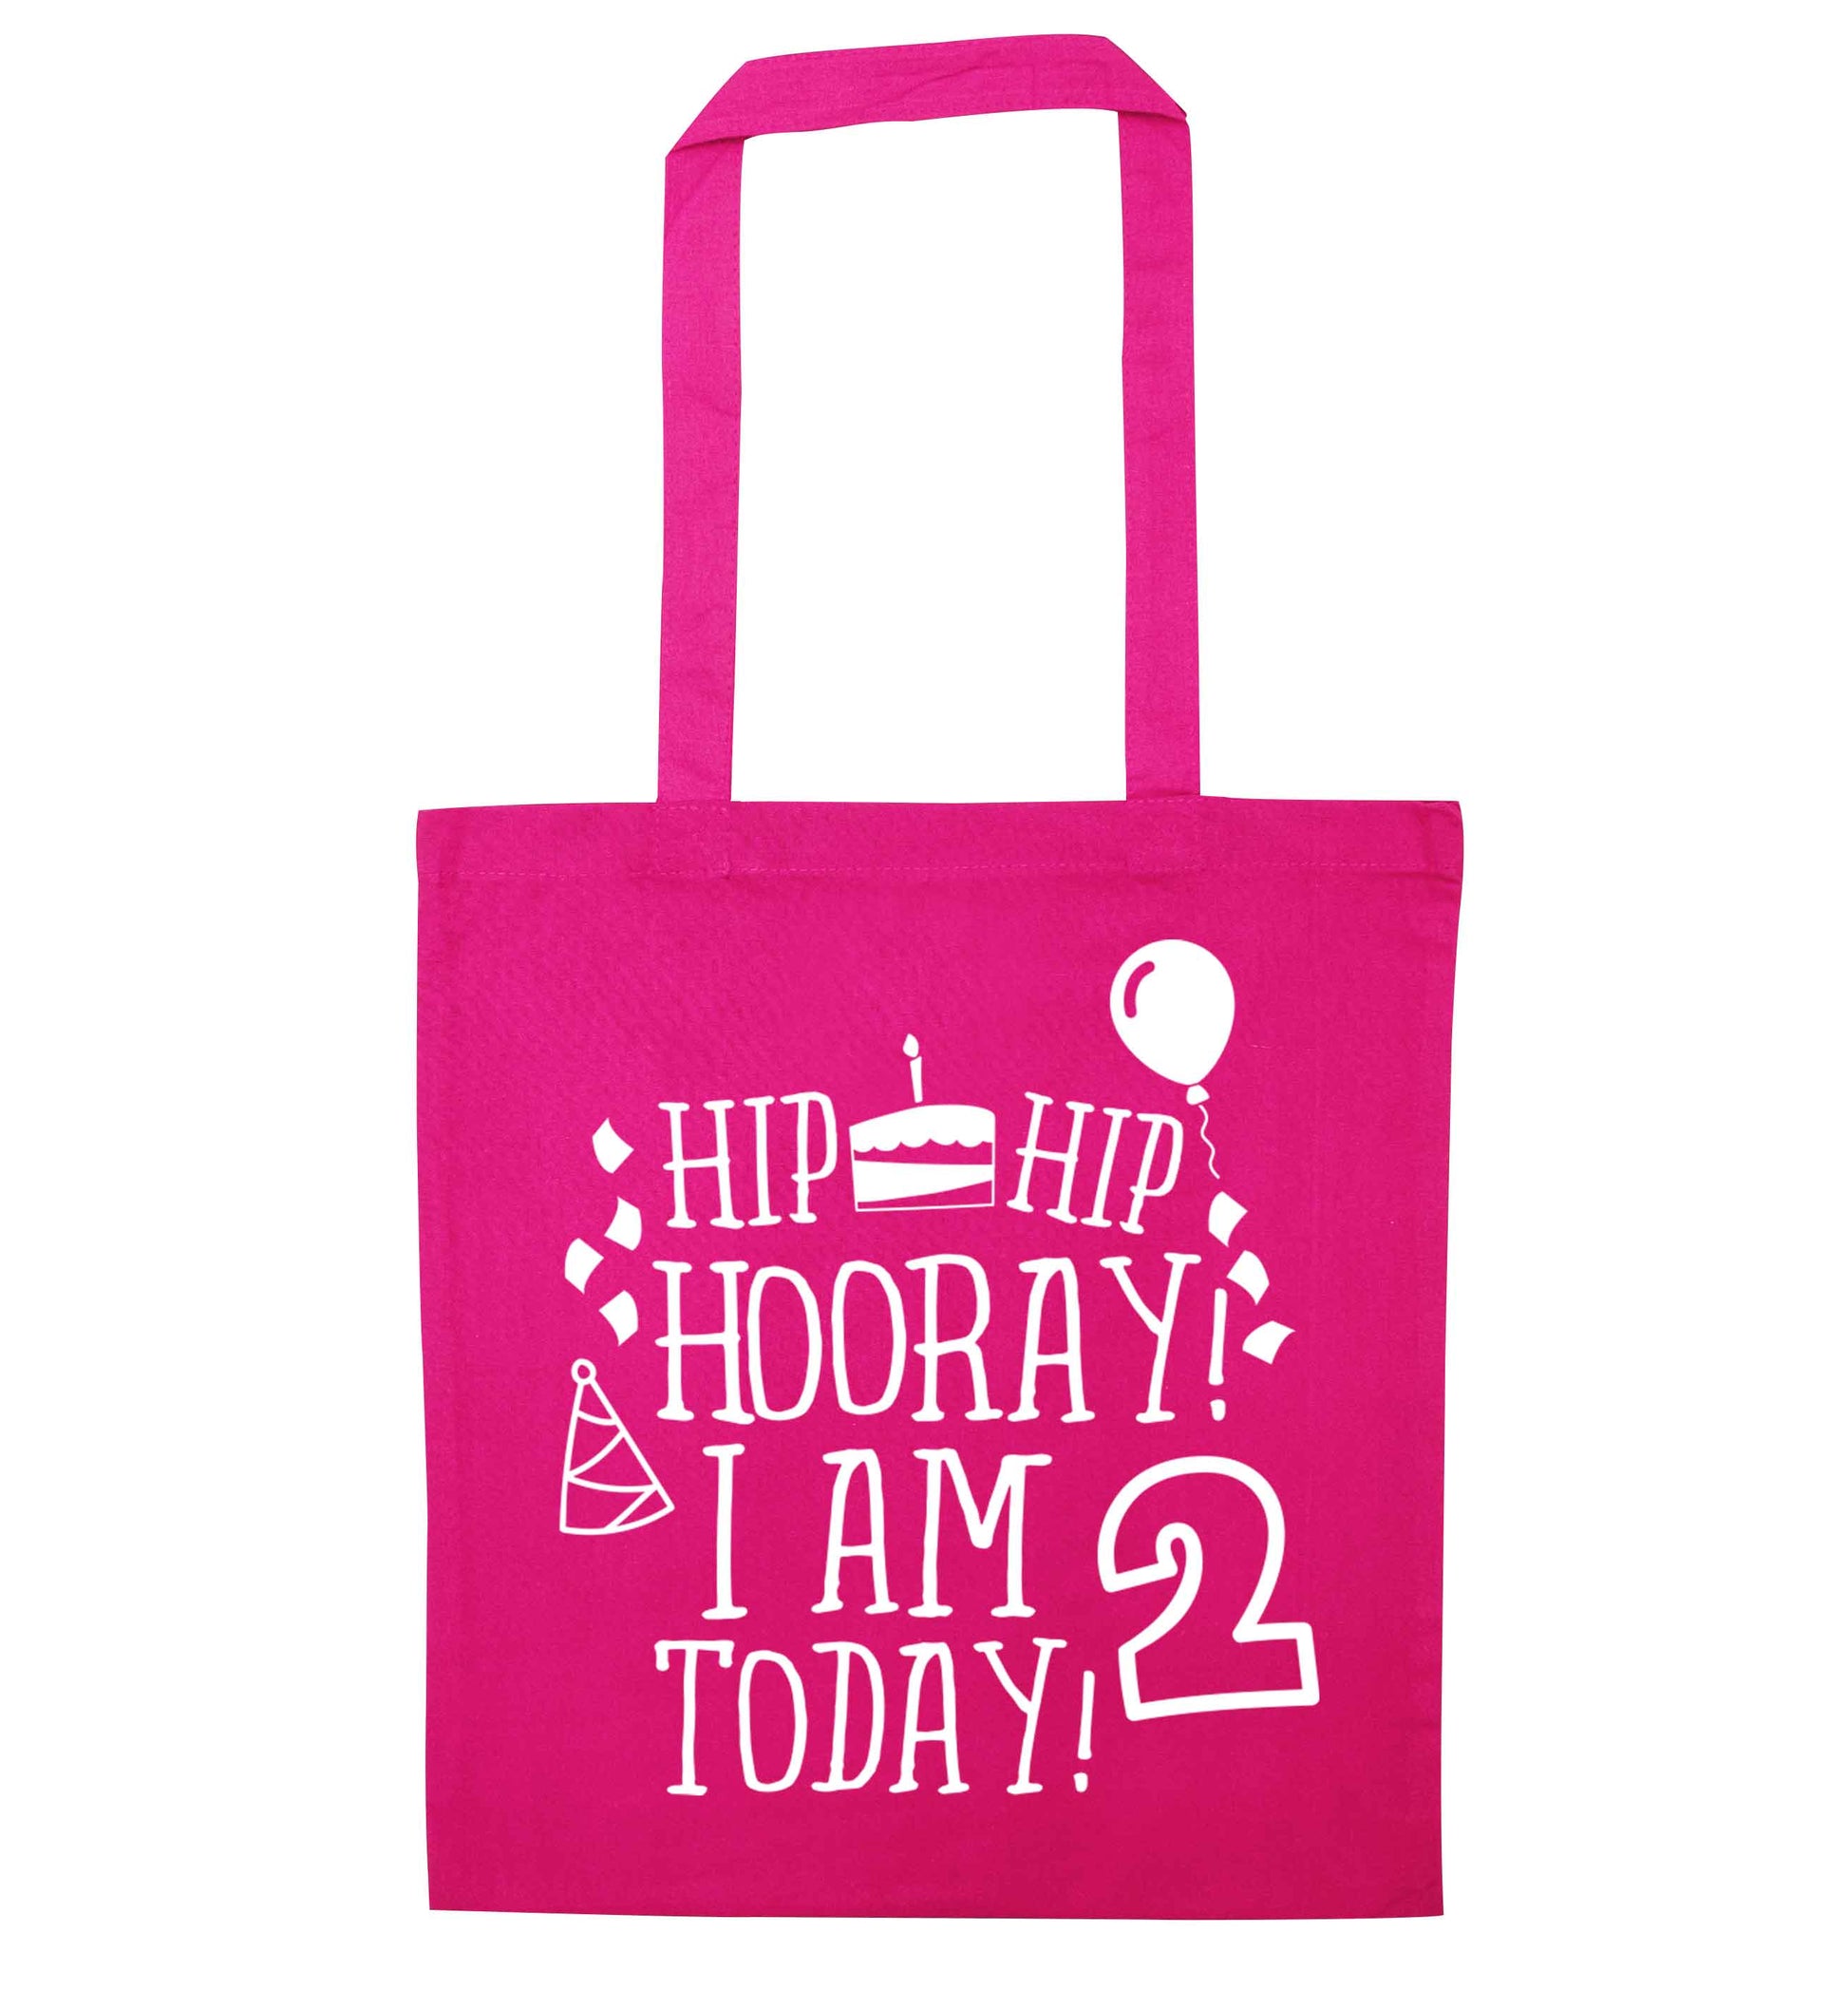 I'm 2 Today pink tote bag